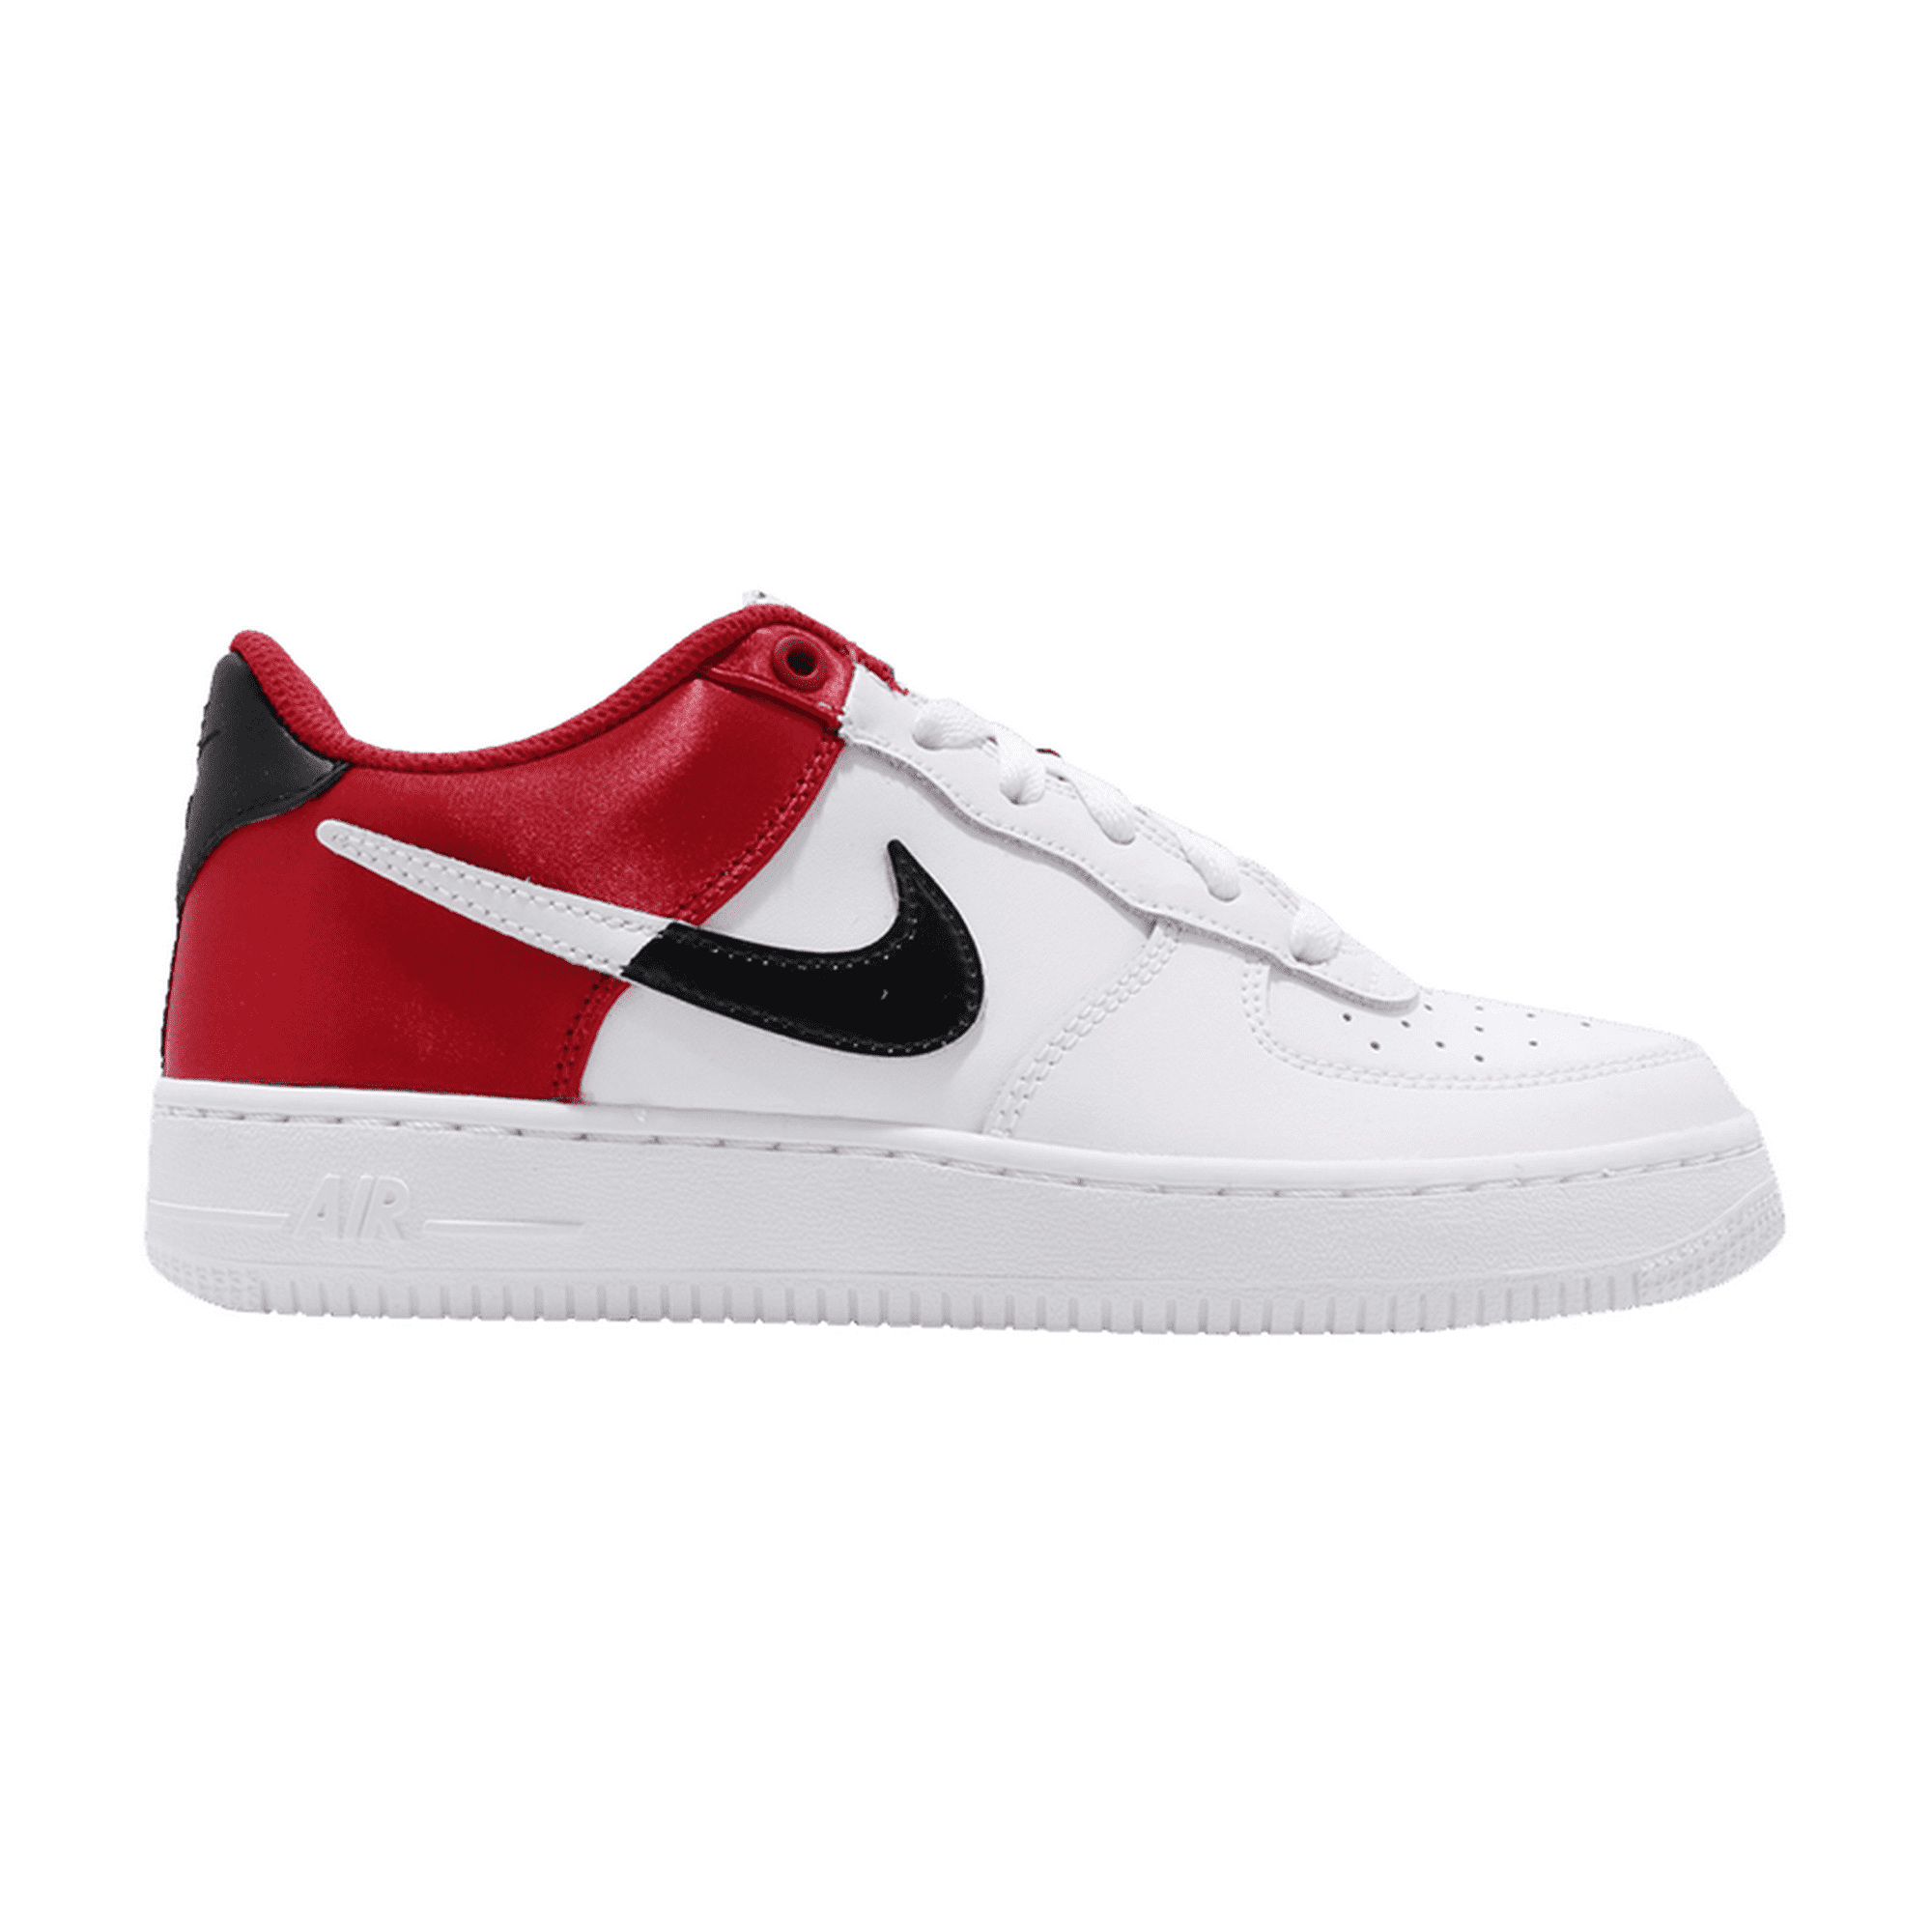 Nike Kids Air Force 1 Lv8 GS Red Satin Basketball Shoe (7) 